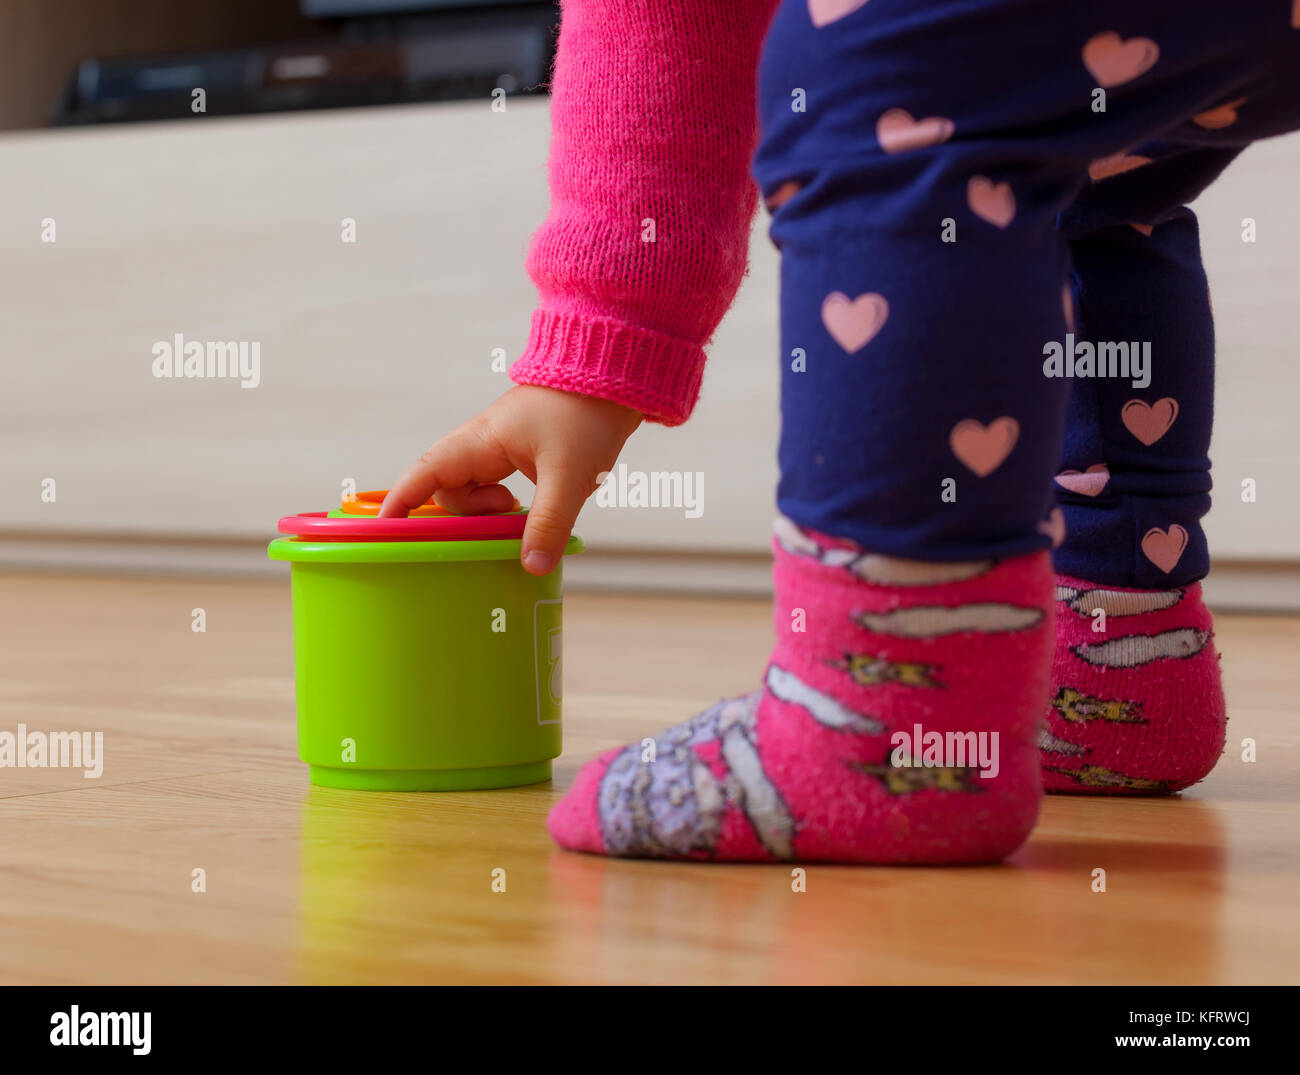 Toddler baby girl plays with colored cups, toy for cognitive development. Stock Photo